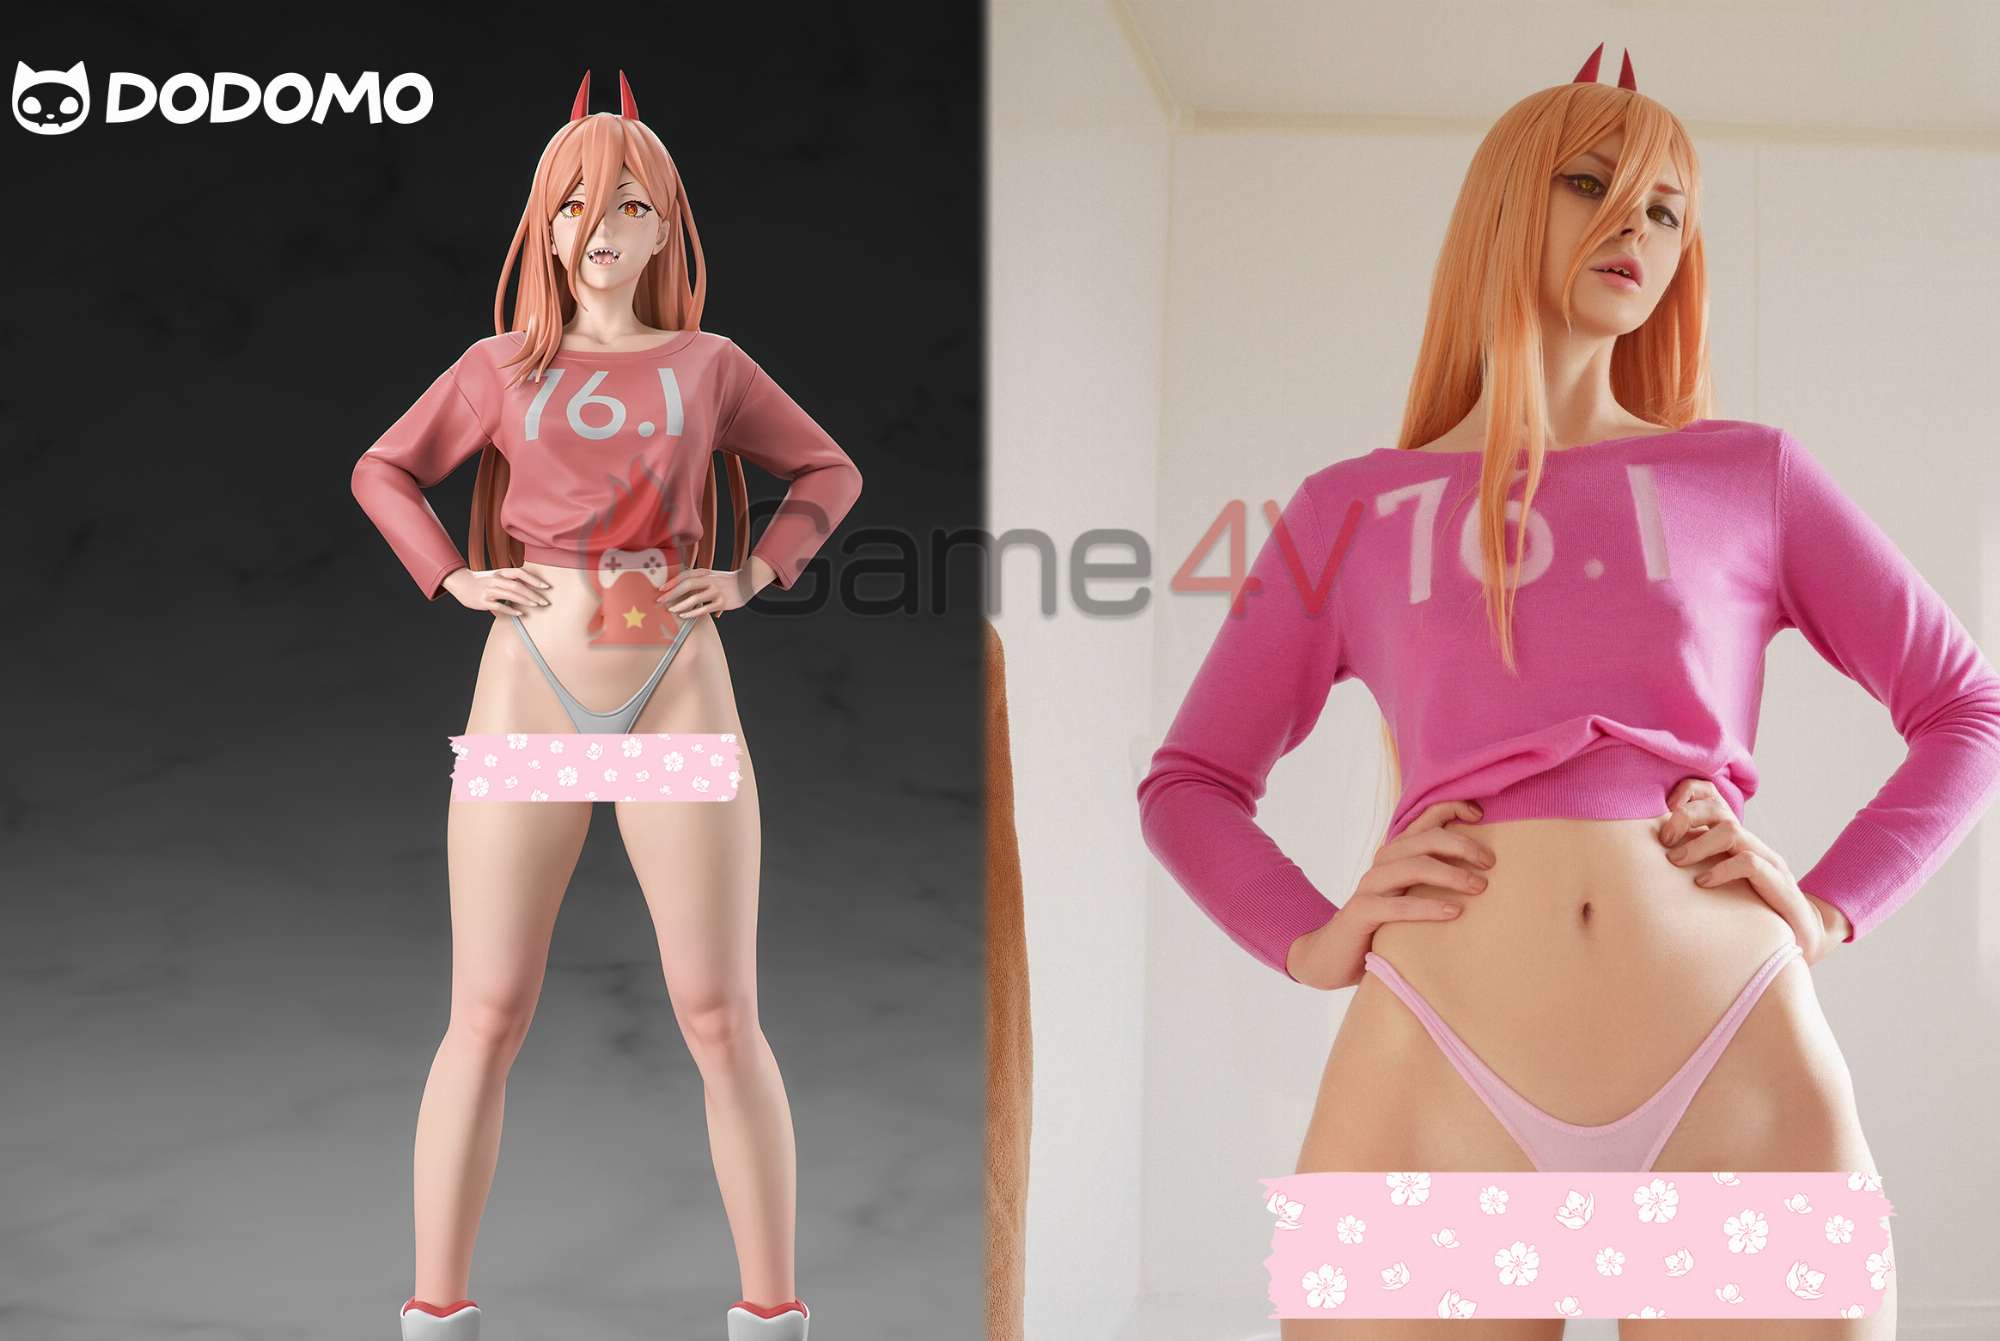 Female cosplayer accuses a company of ‘plagiarizing’ her image